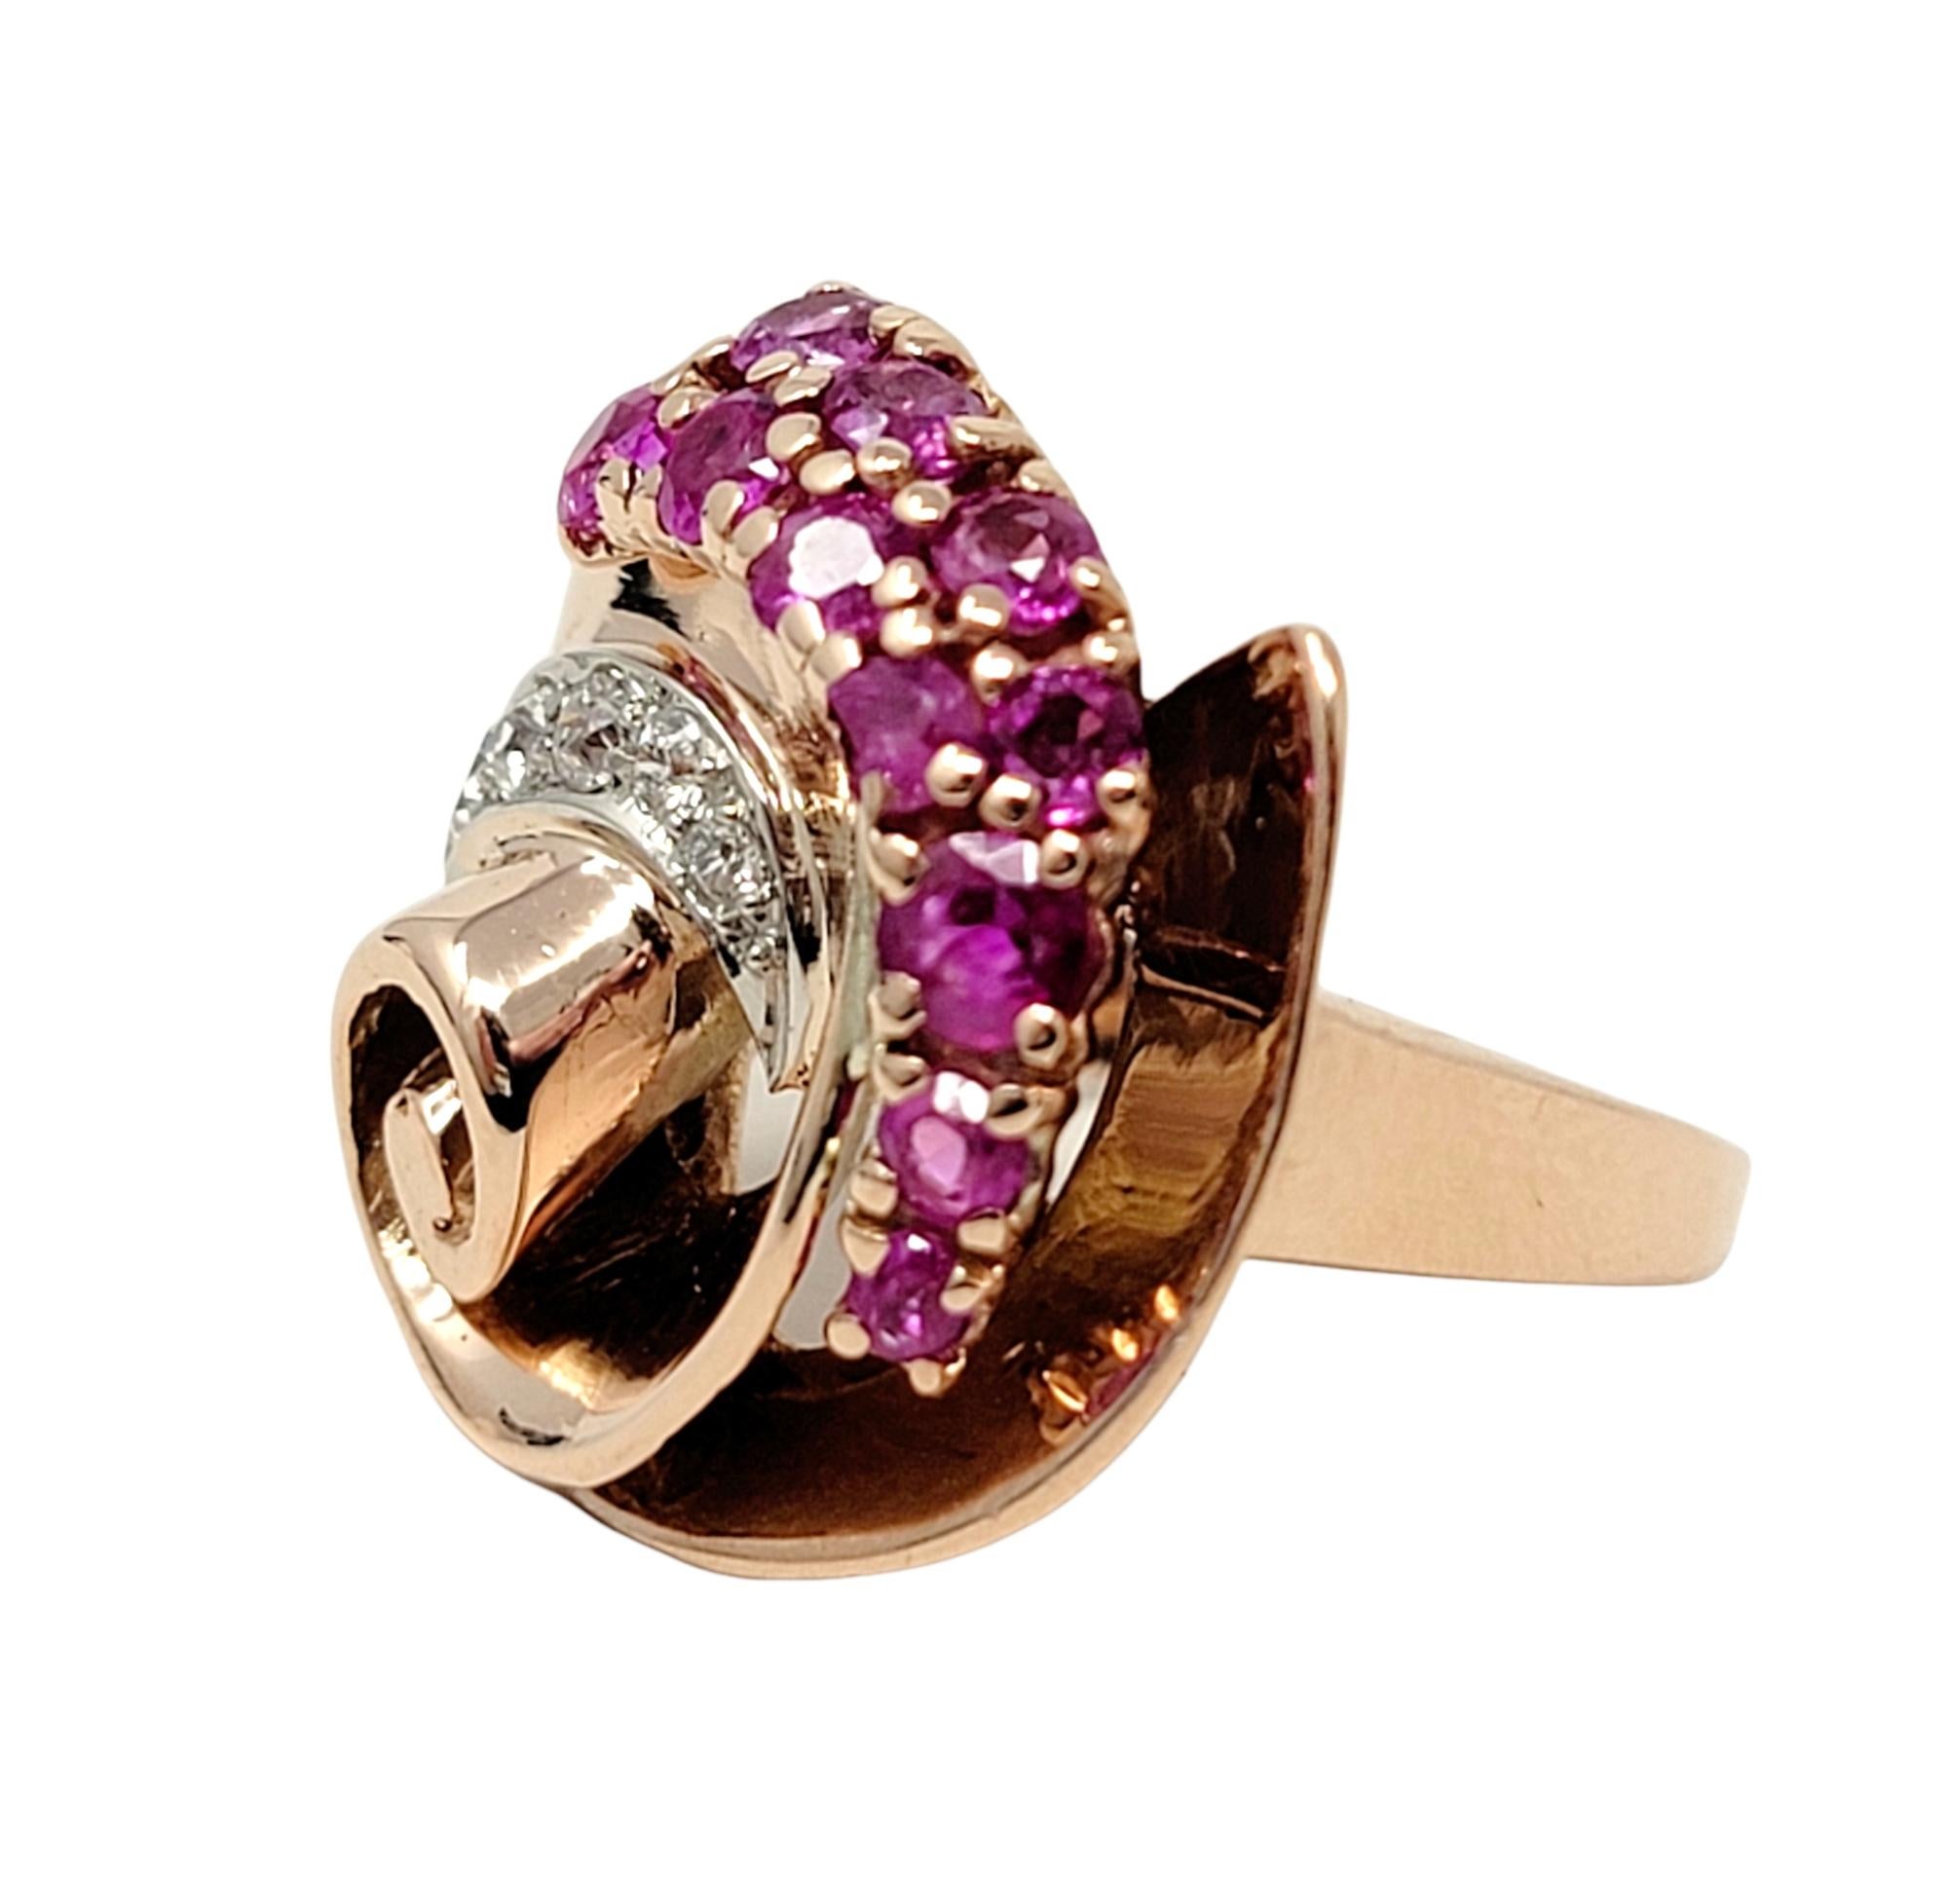 Ring size: 6.25

Gorgeous, one of a kind rose gold swirl ring with ruby and diamond accents. This colorful, artsy ring is embellished with natural purplish-red rubies and bright white diamonds and set in an asymmetric swirl pattern. The gentle